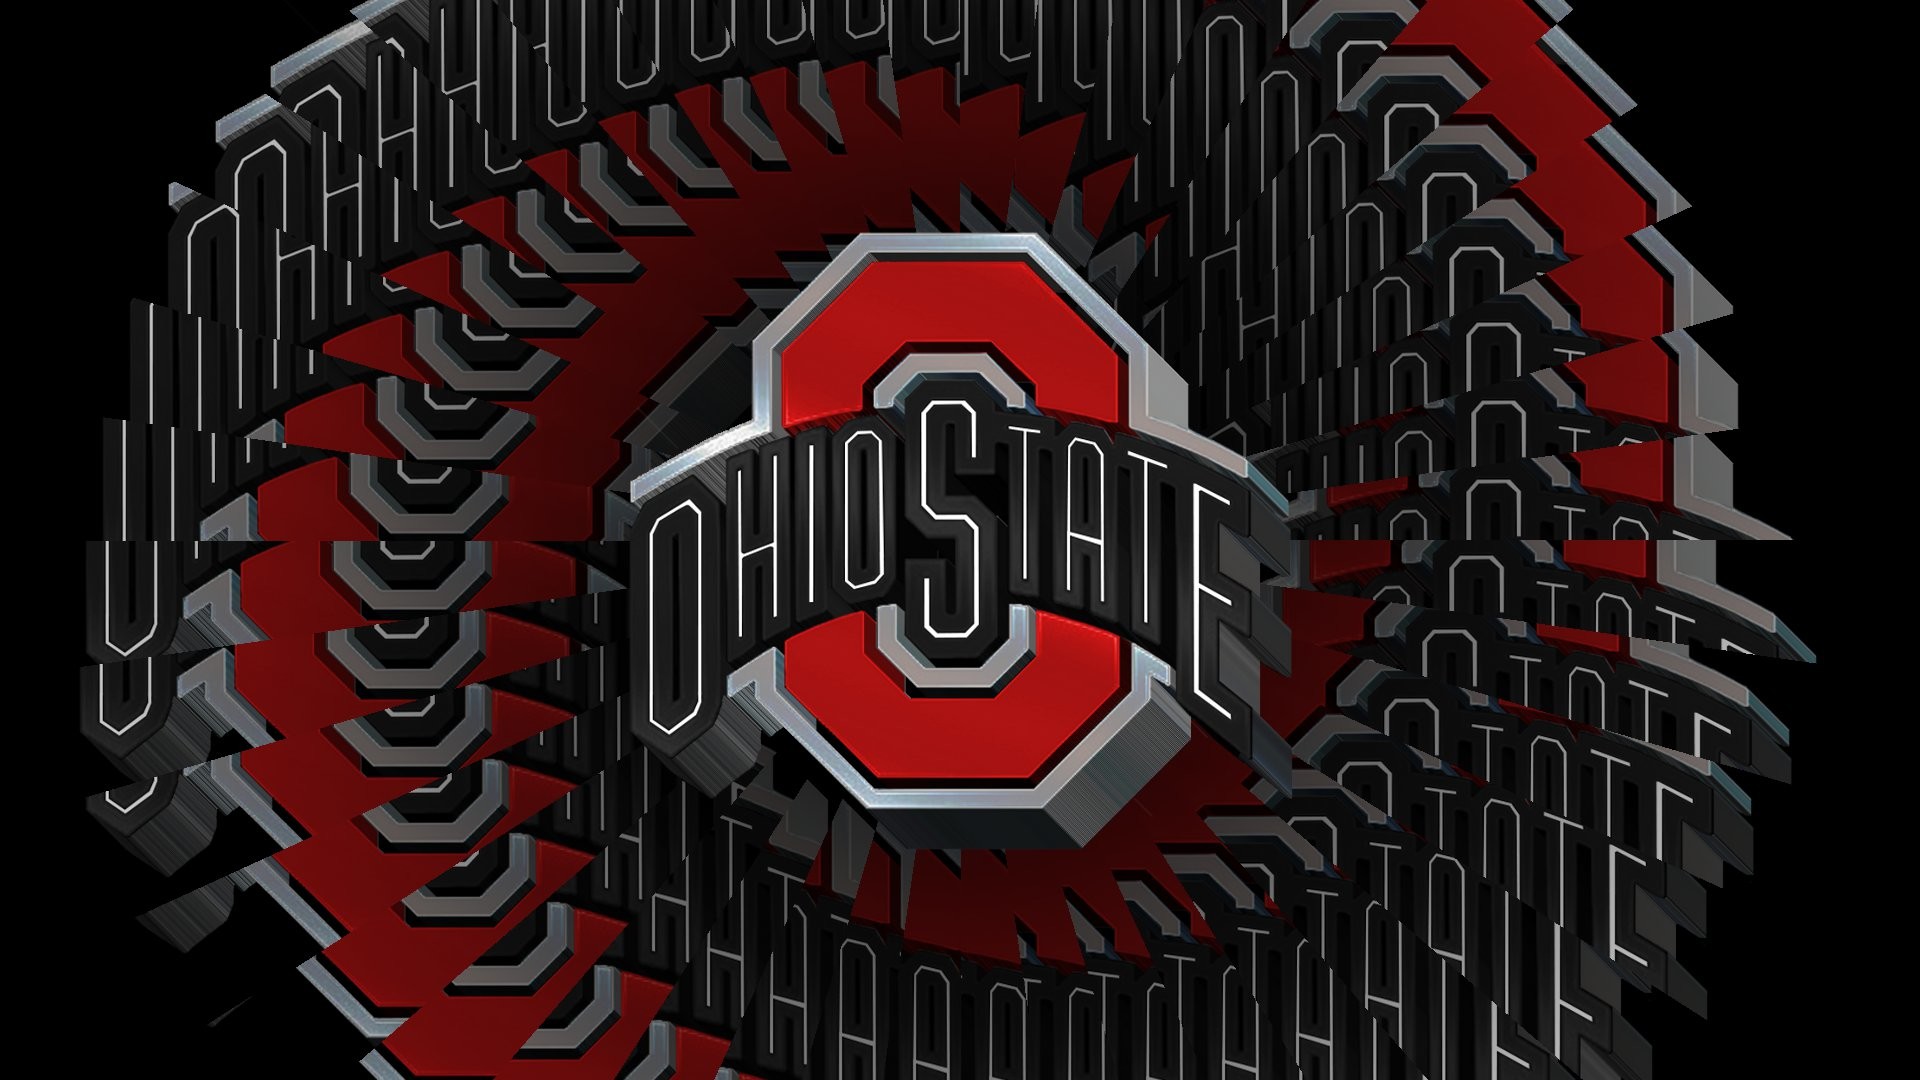 1920x1080 Ohio State Football images OSU Wallpaper 411 HD wallpaper and 